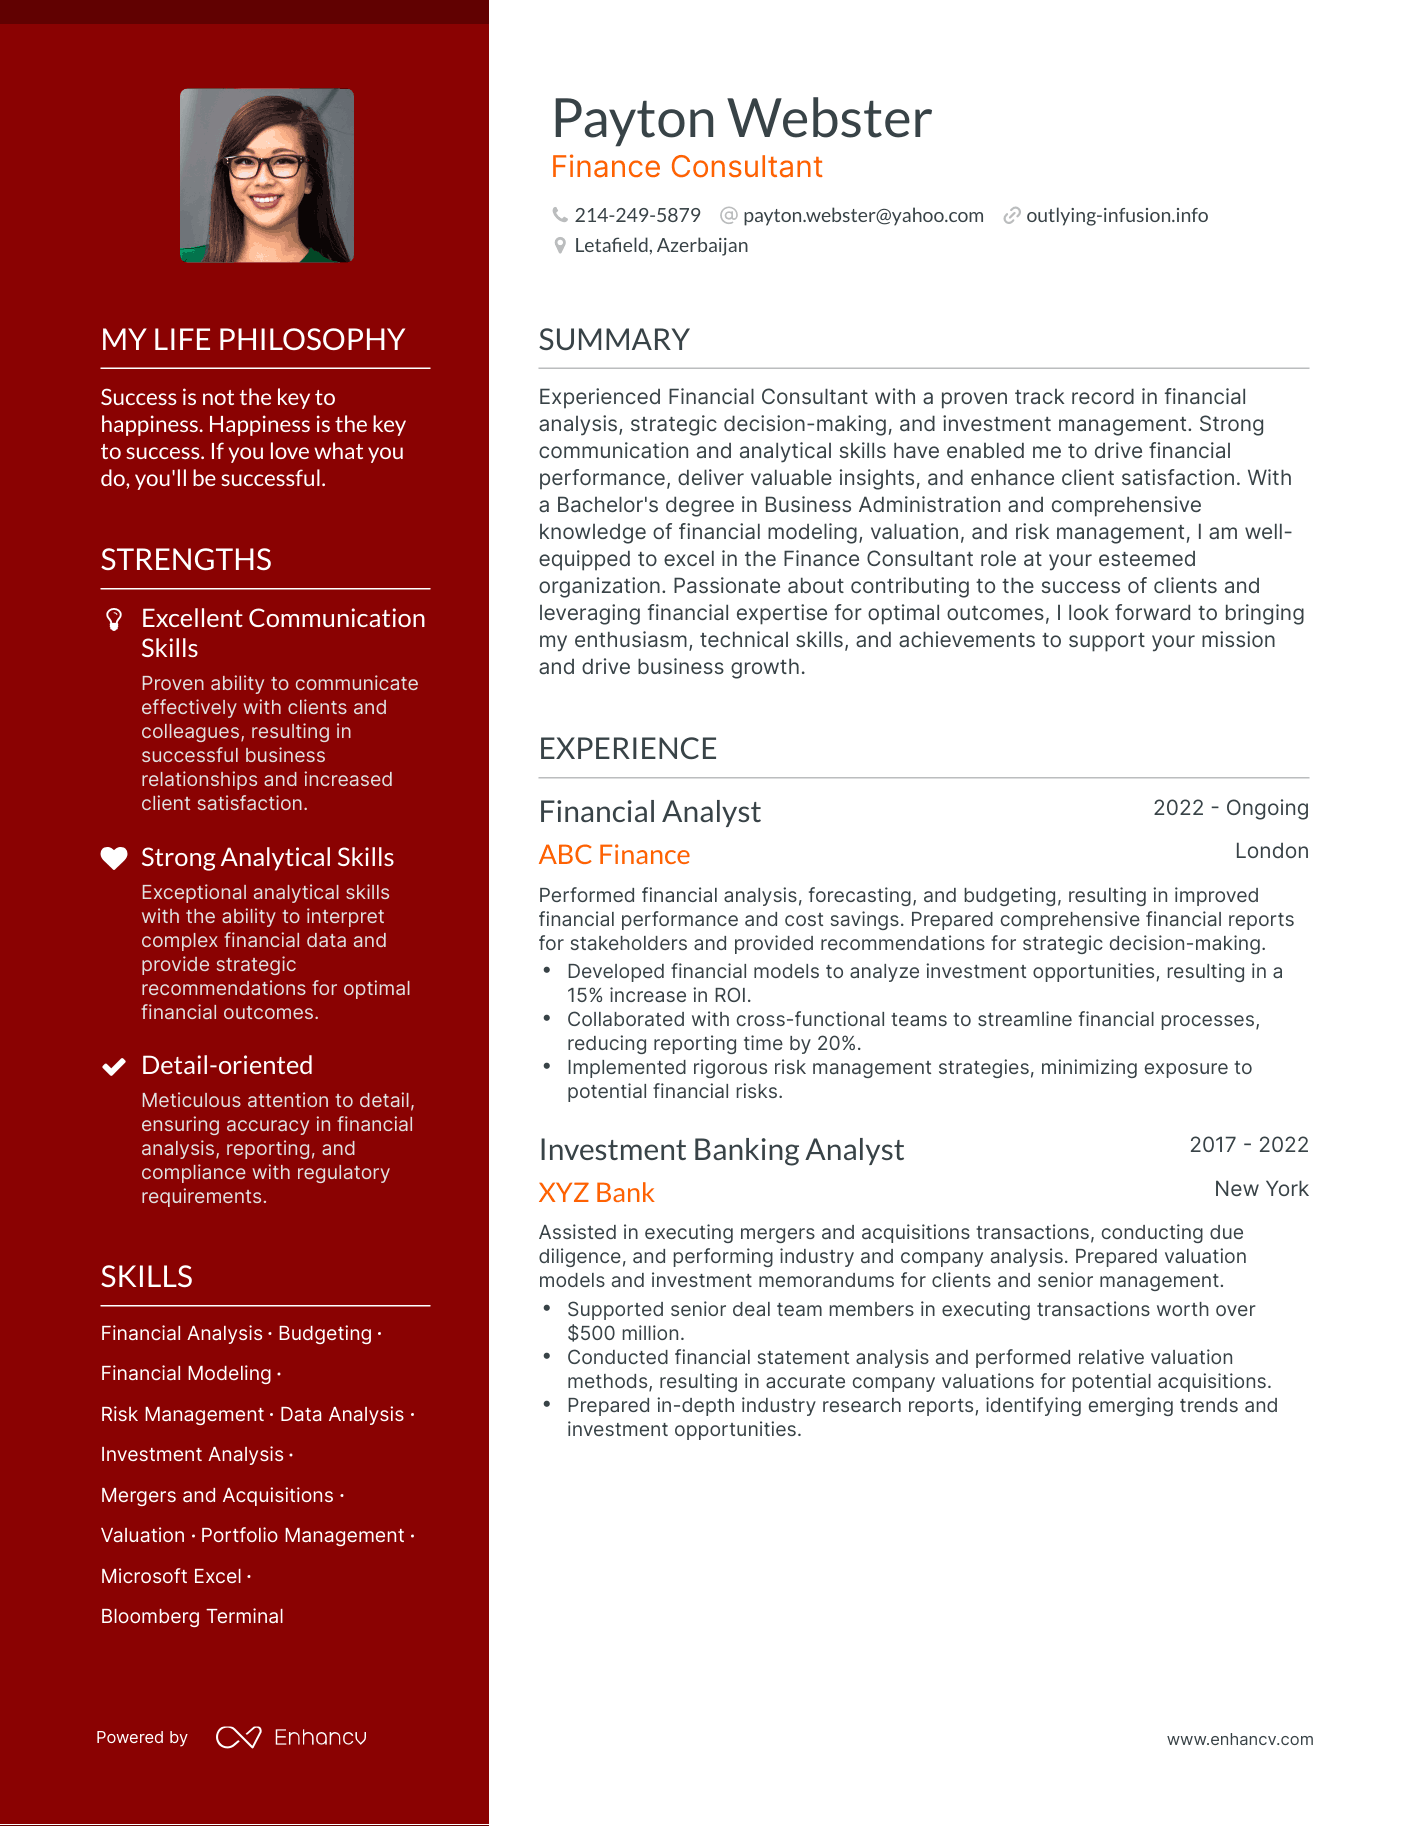 3 Finance Consultant Resume Examples & How-To Guide for 2023